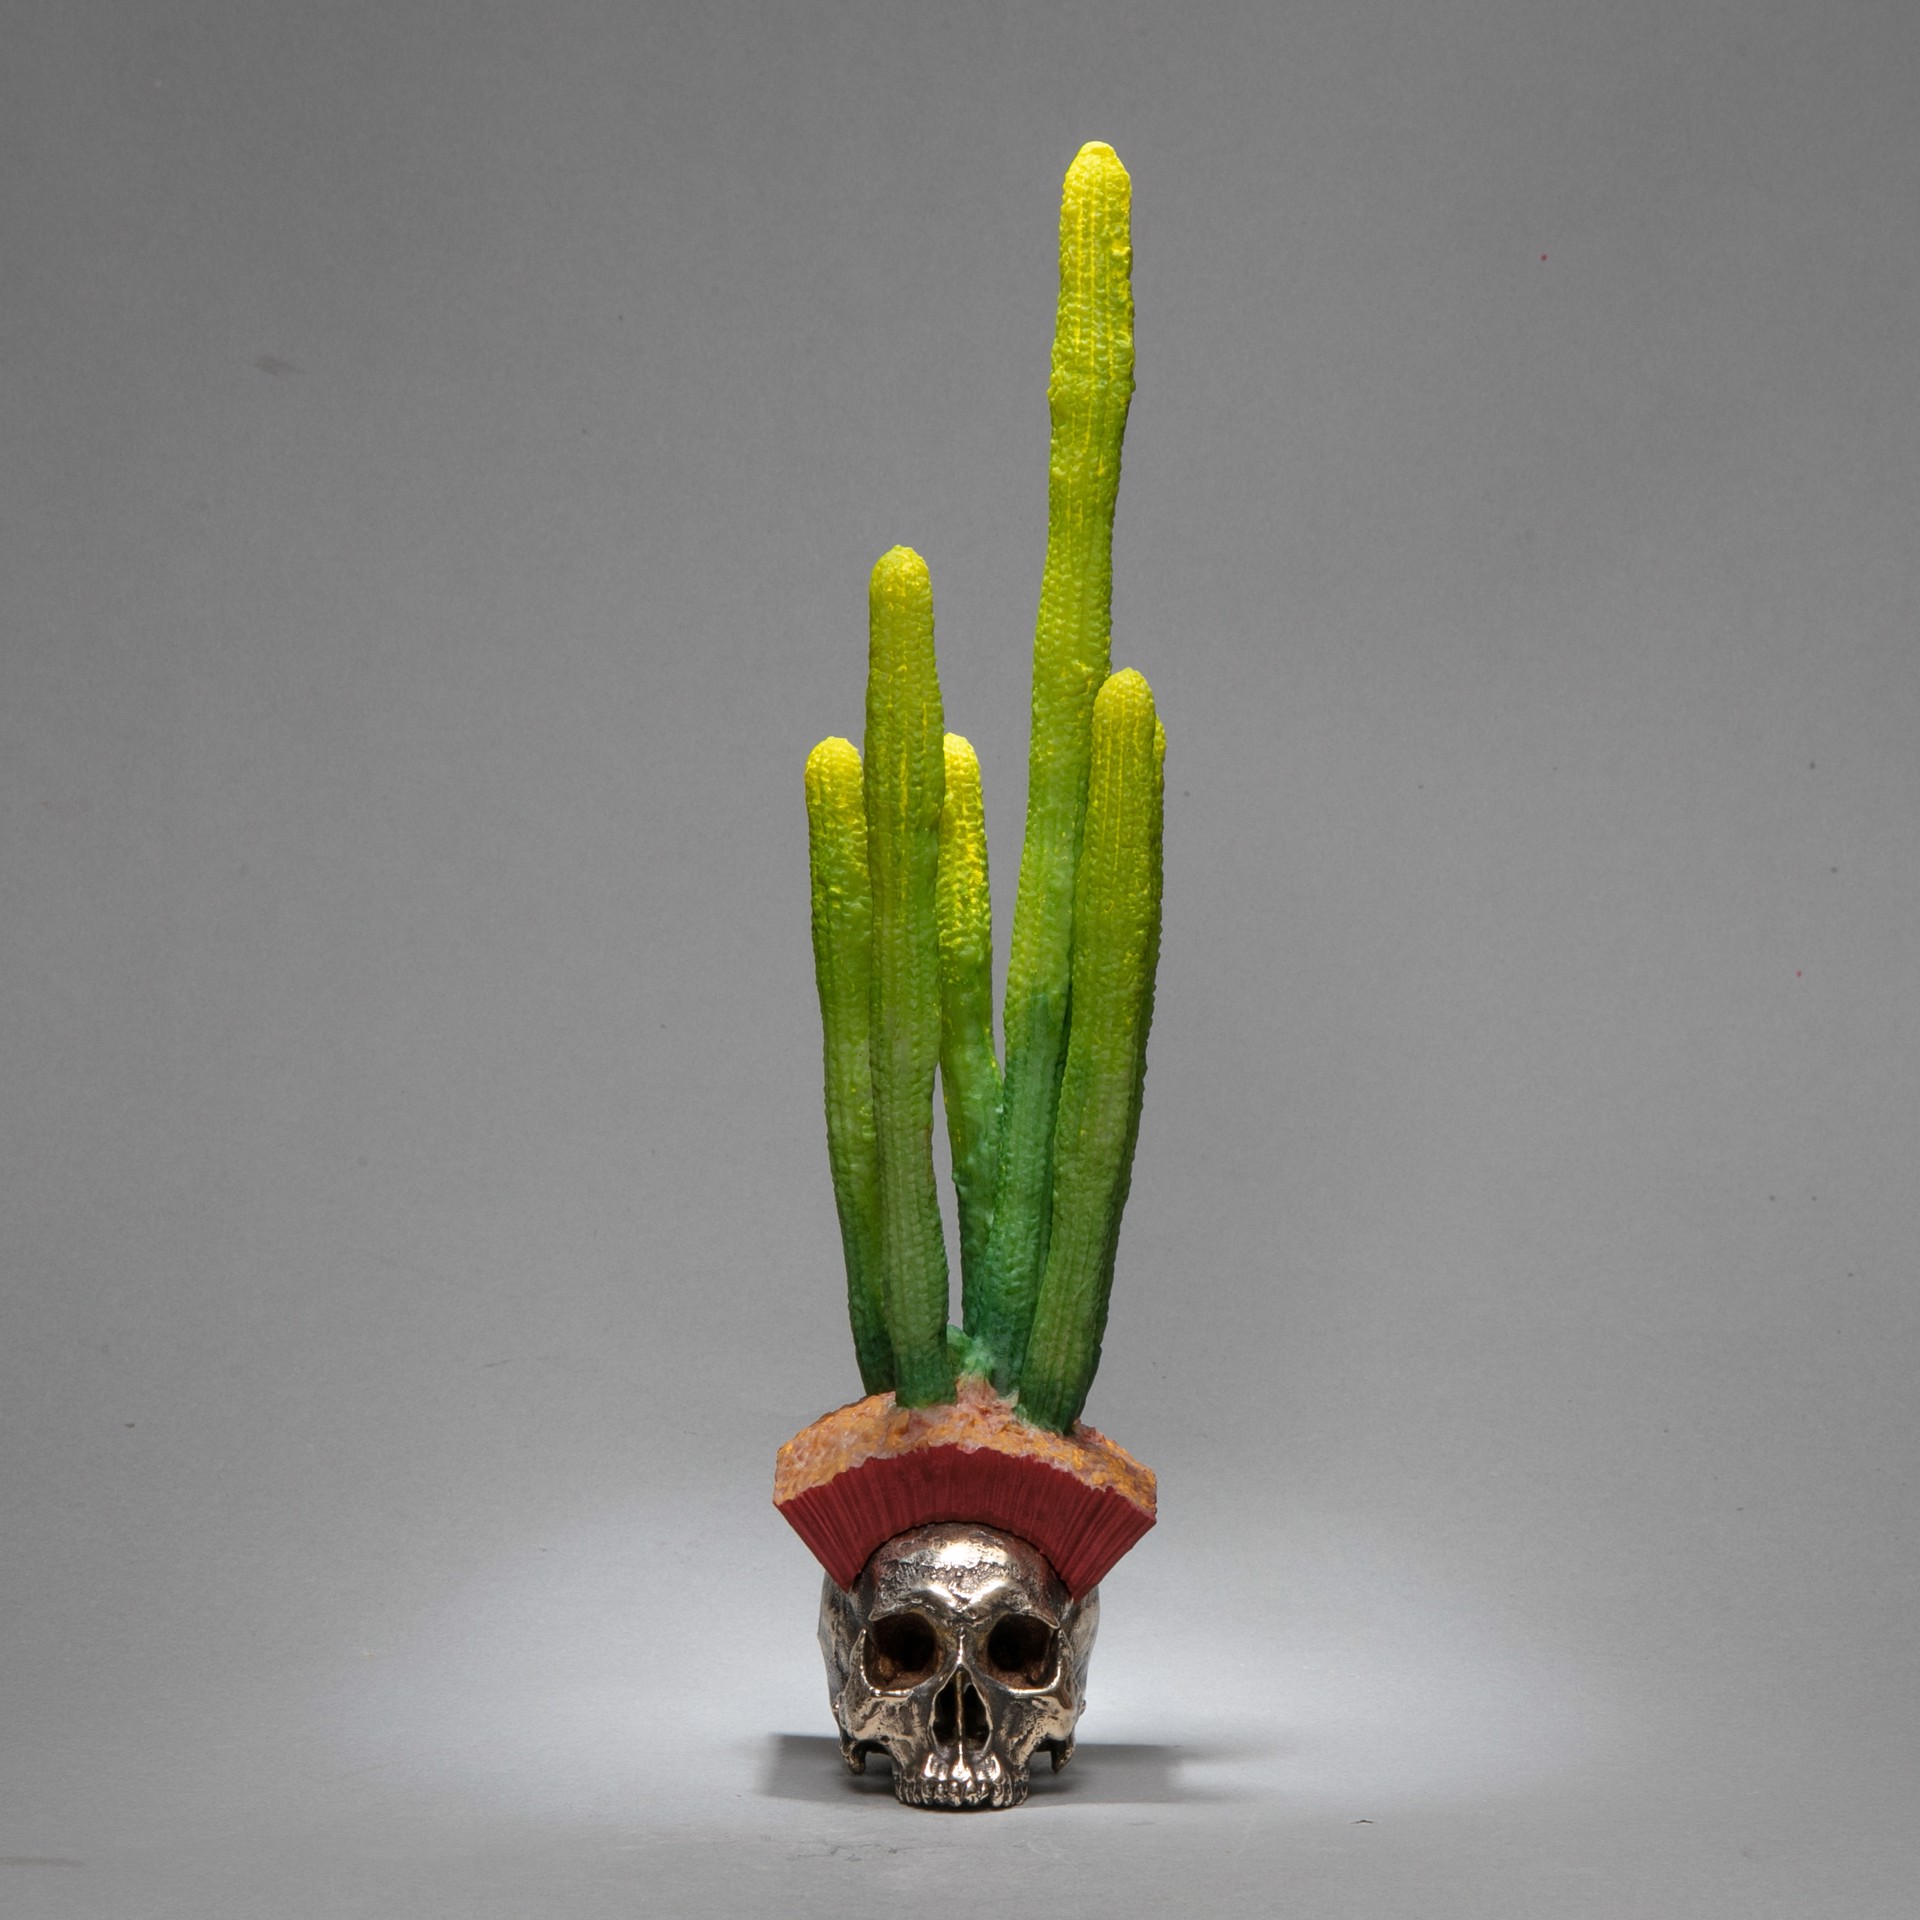 Cactus Skull by Dana Younger